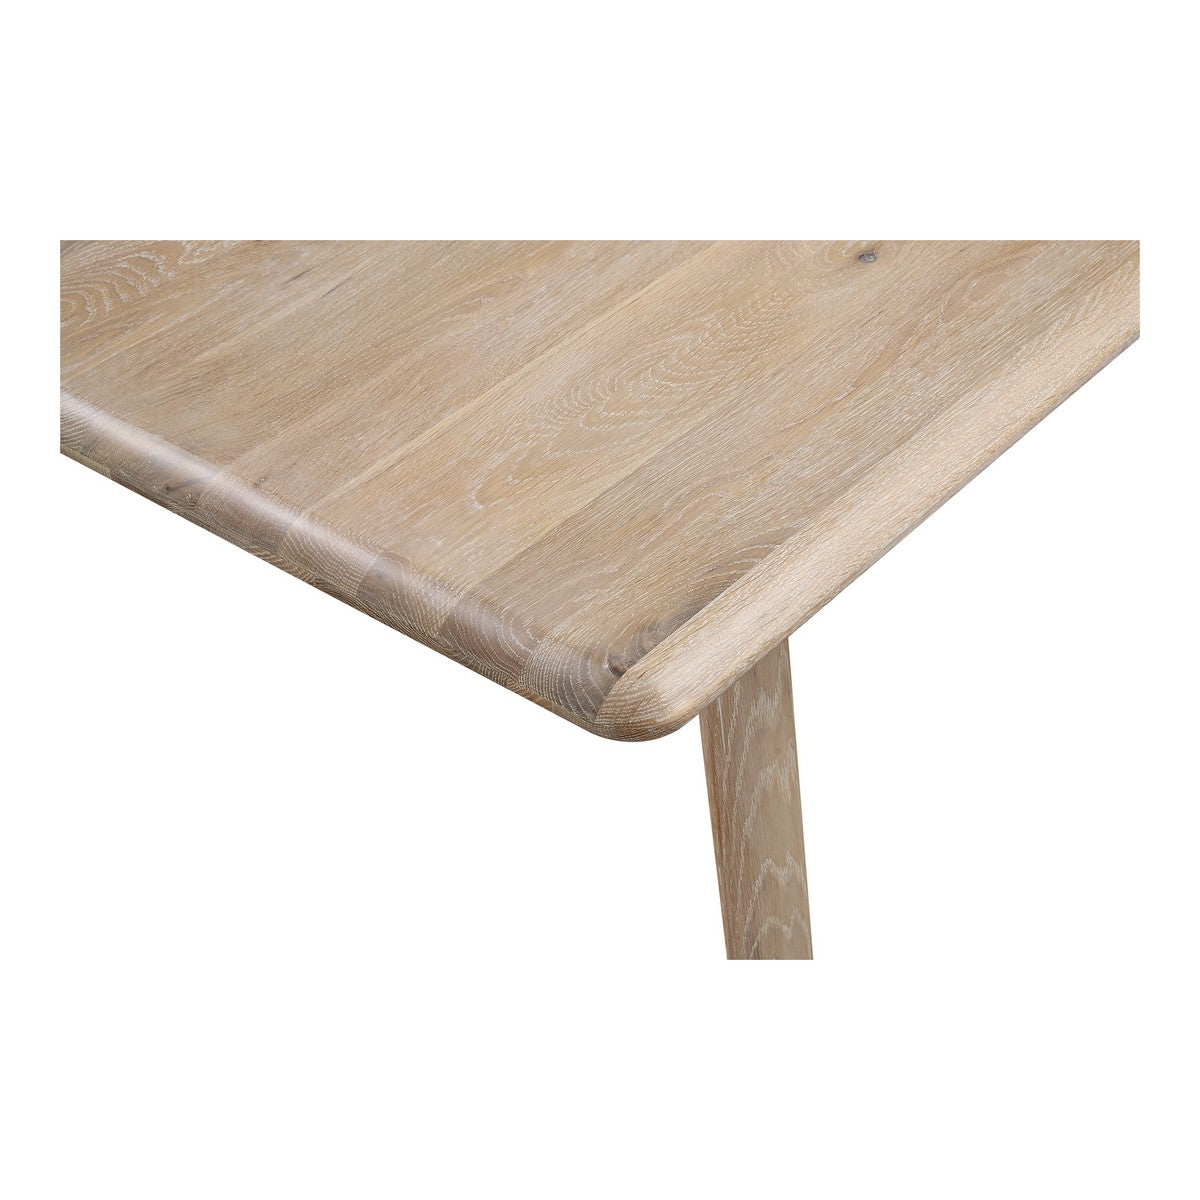 Moe's Home Collection Malibu Dining Table White Oak - BC-1046-18